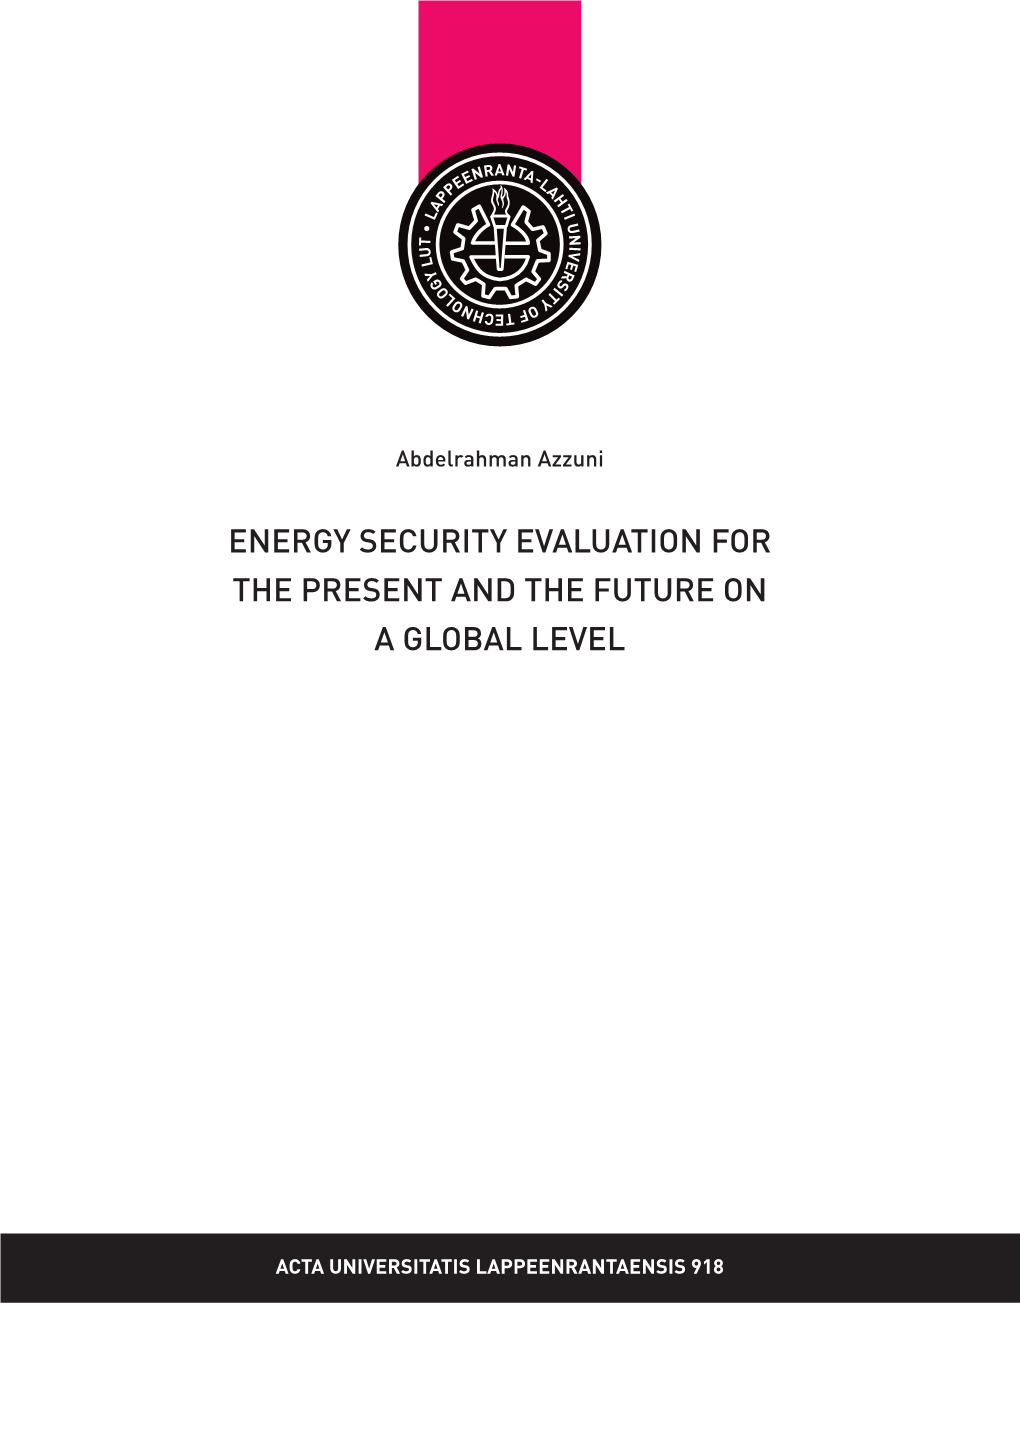 ENERGY SECURITY EVALUATION for the PRESENT and the FUTURE on a GLOBAL LEVEL Abdelrahman Azzuni Abdelrahman Azzuni